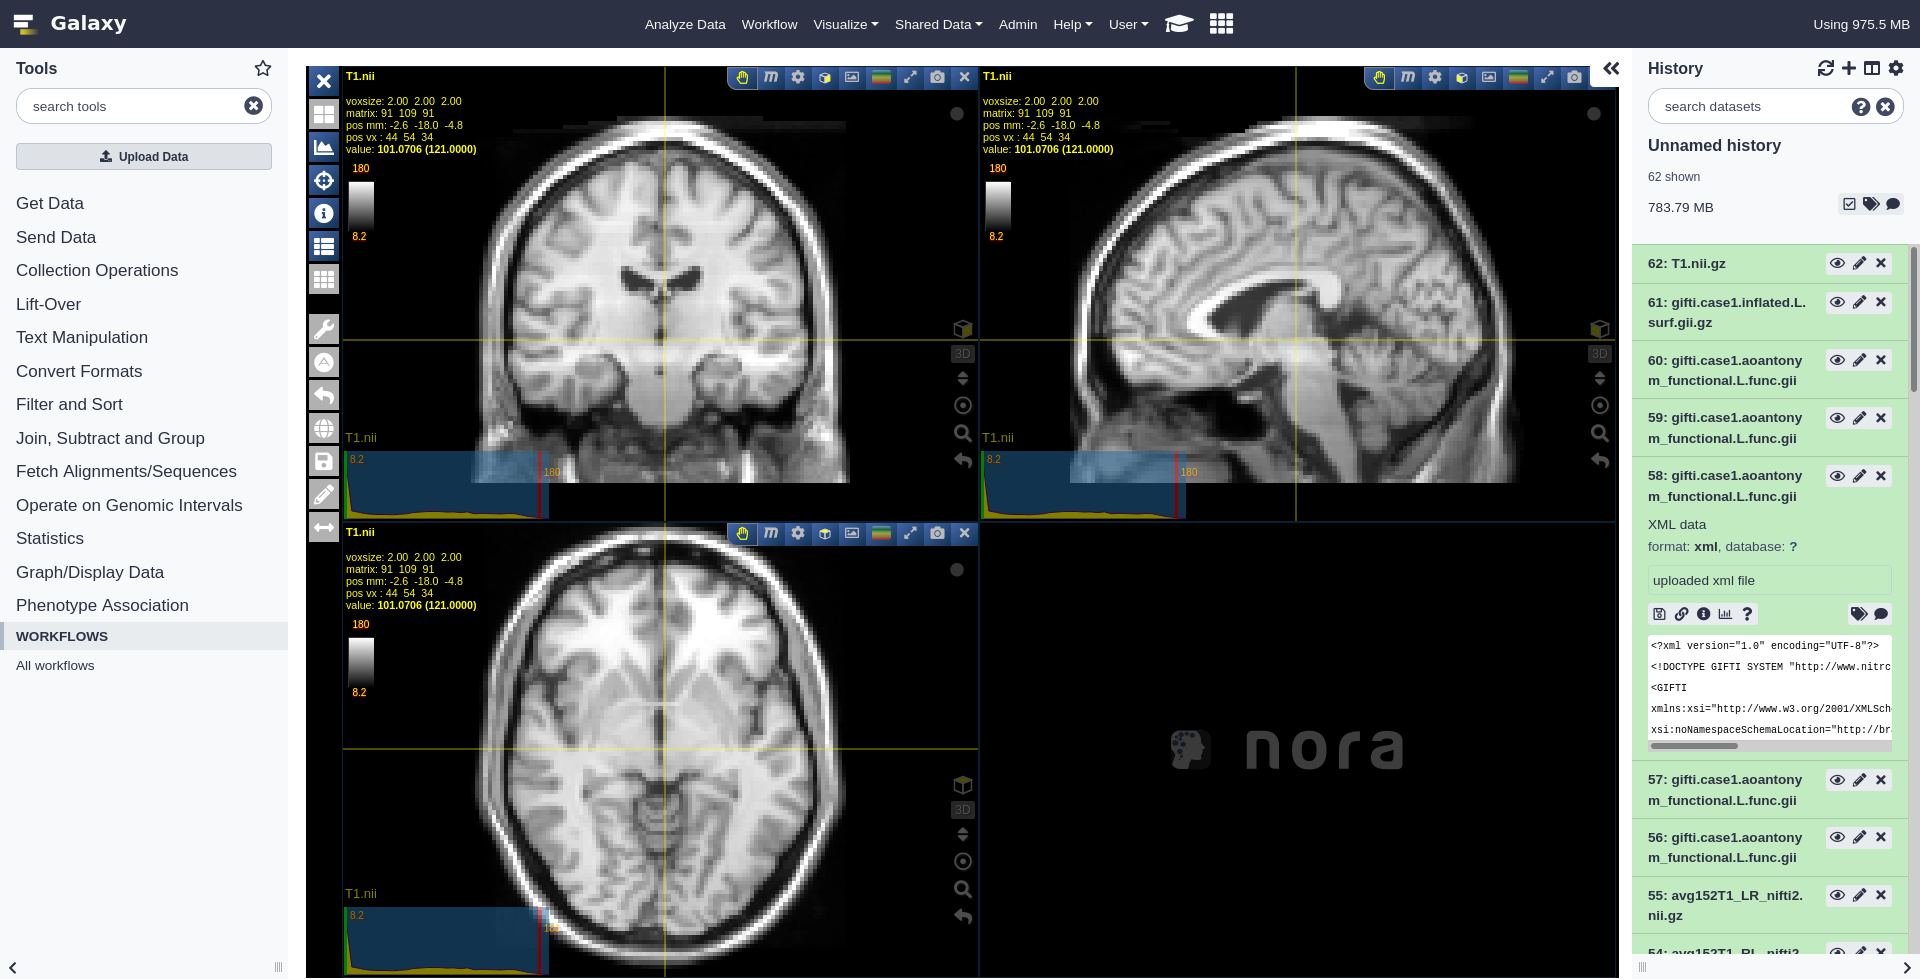 Screenshot of the NORA visualizer showing three views of a scan of a human brain.